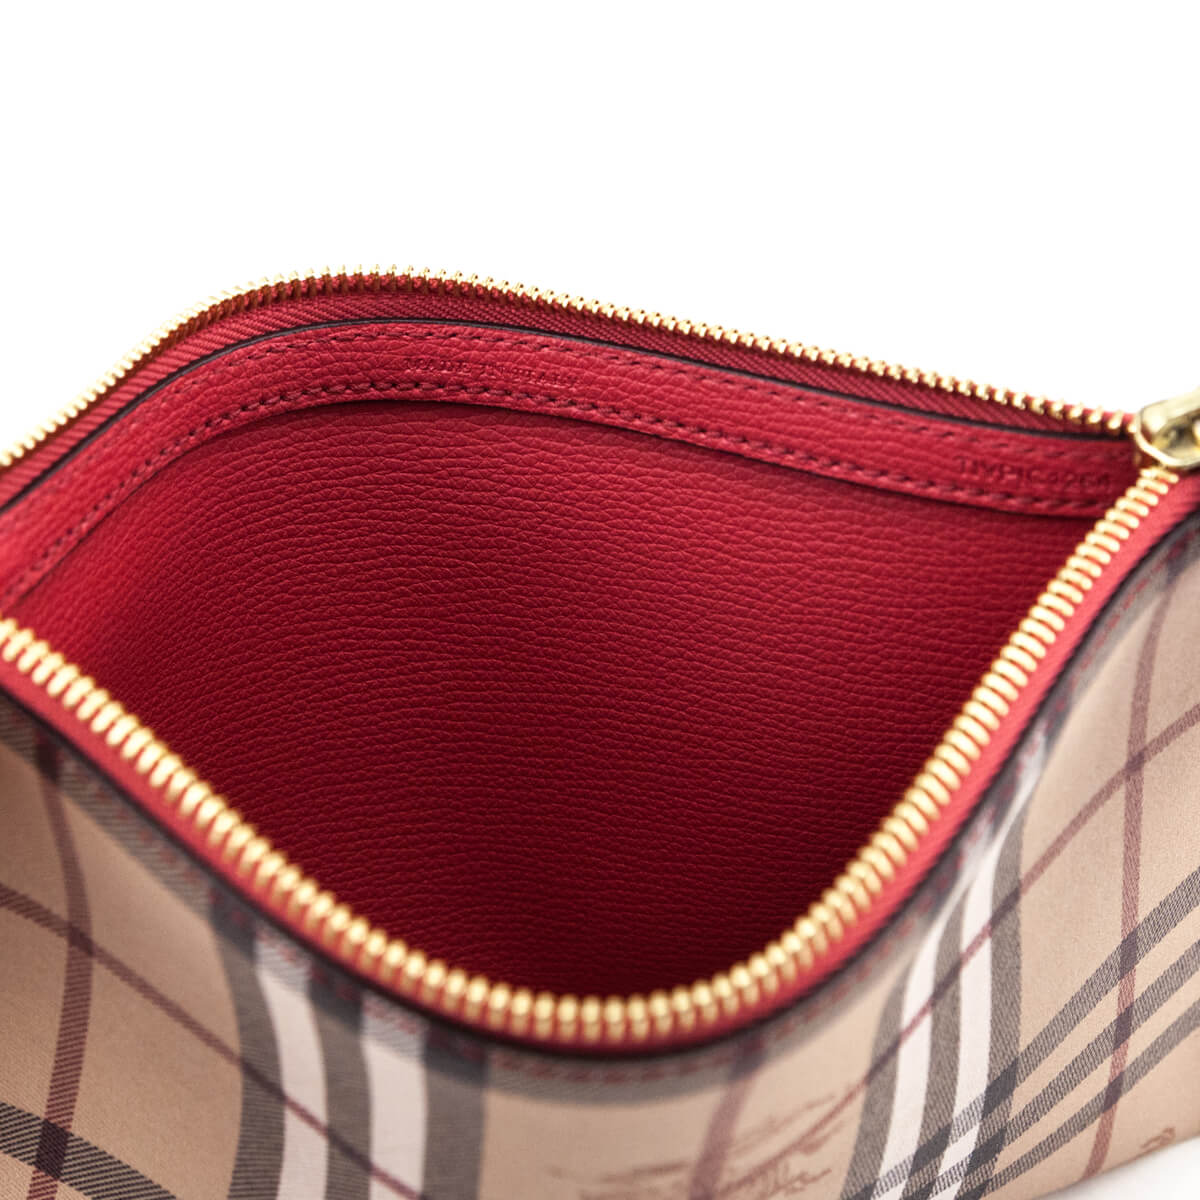 Burberry Haymarket Check Red Calfskin Pouch - Love that Bag etc - Preowned Authentic Designer Handbags & Preloved Fashions